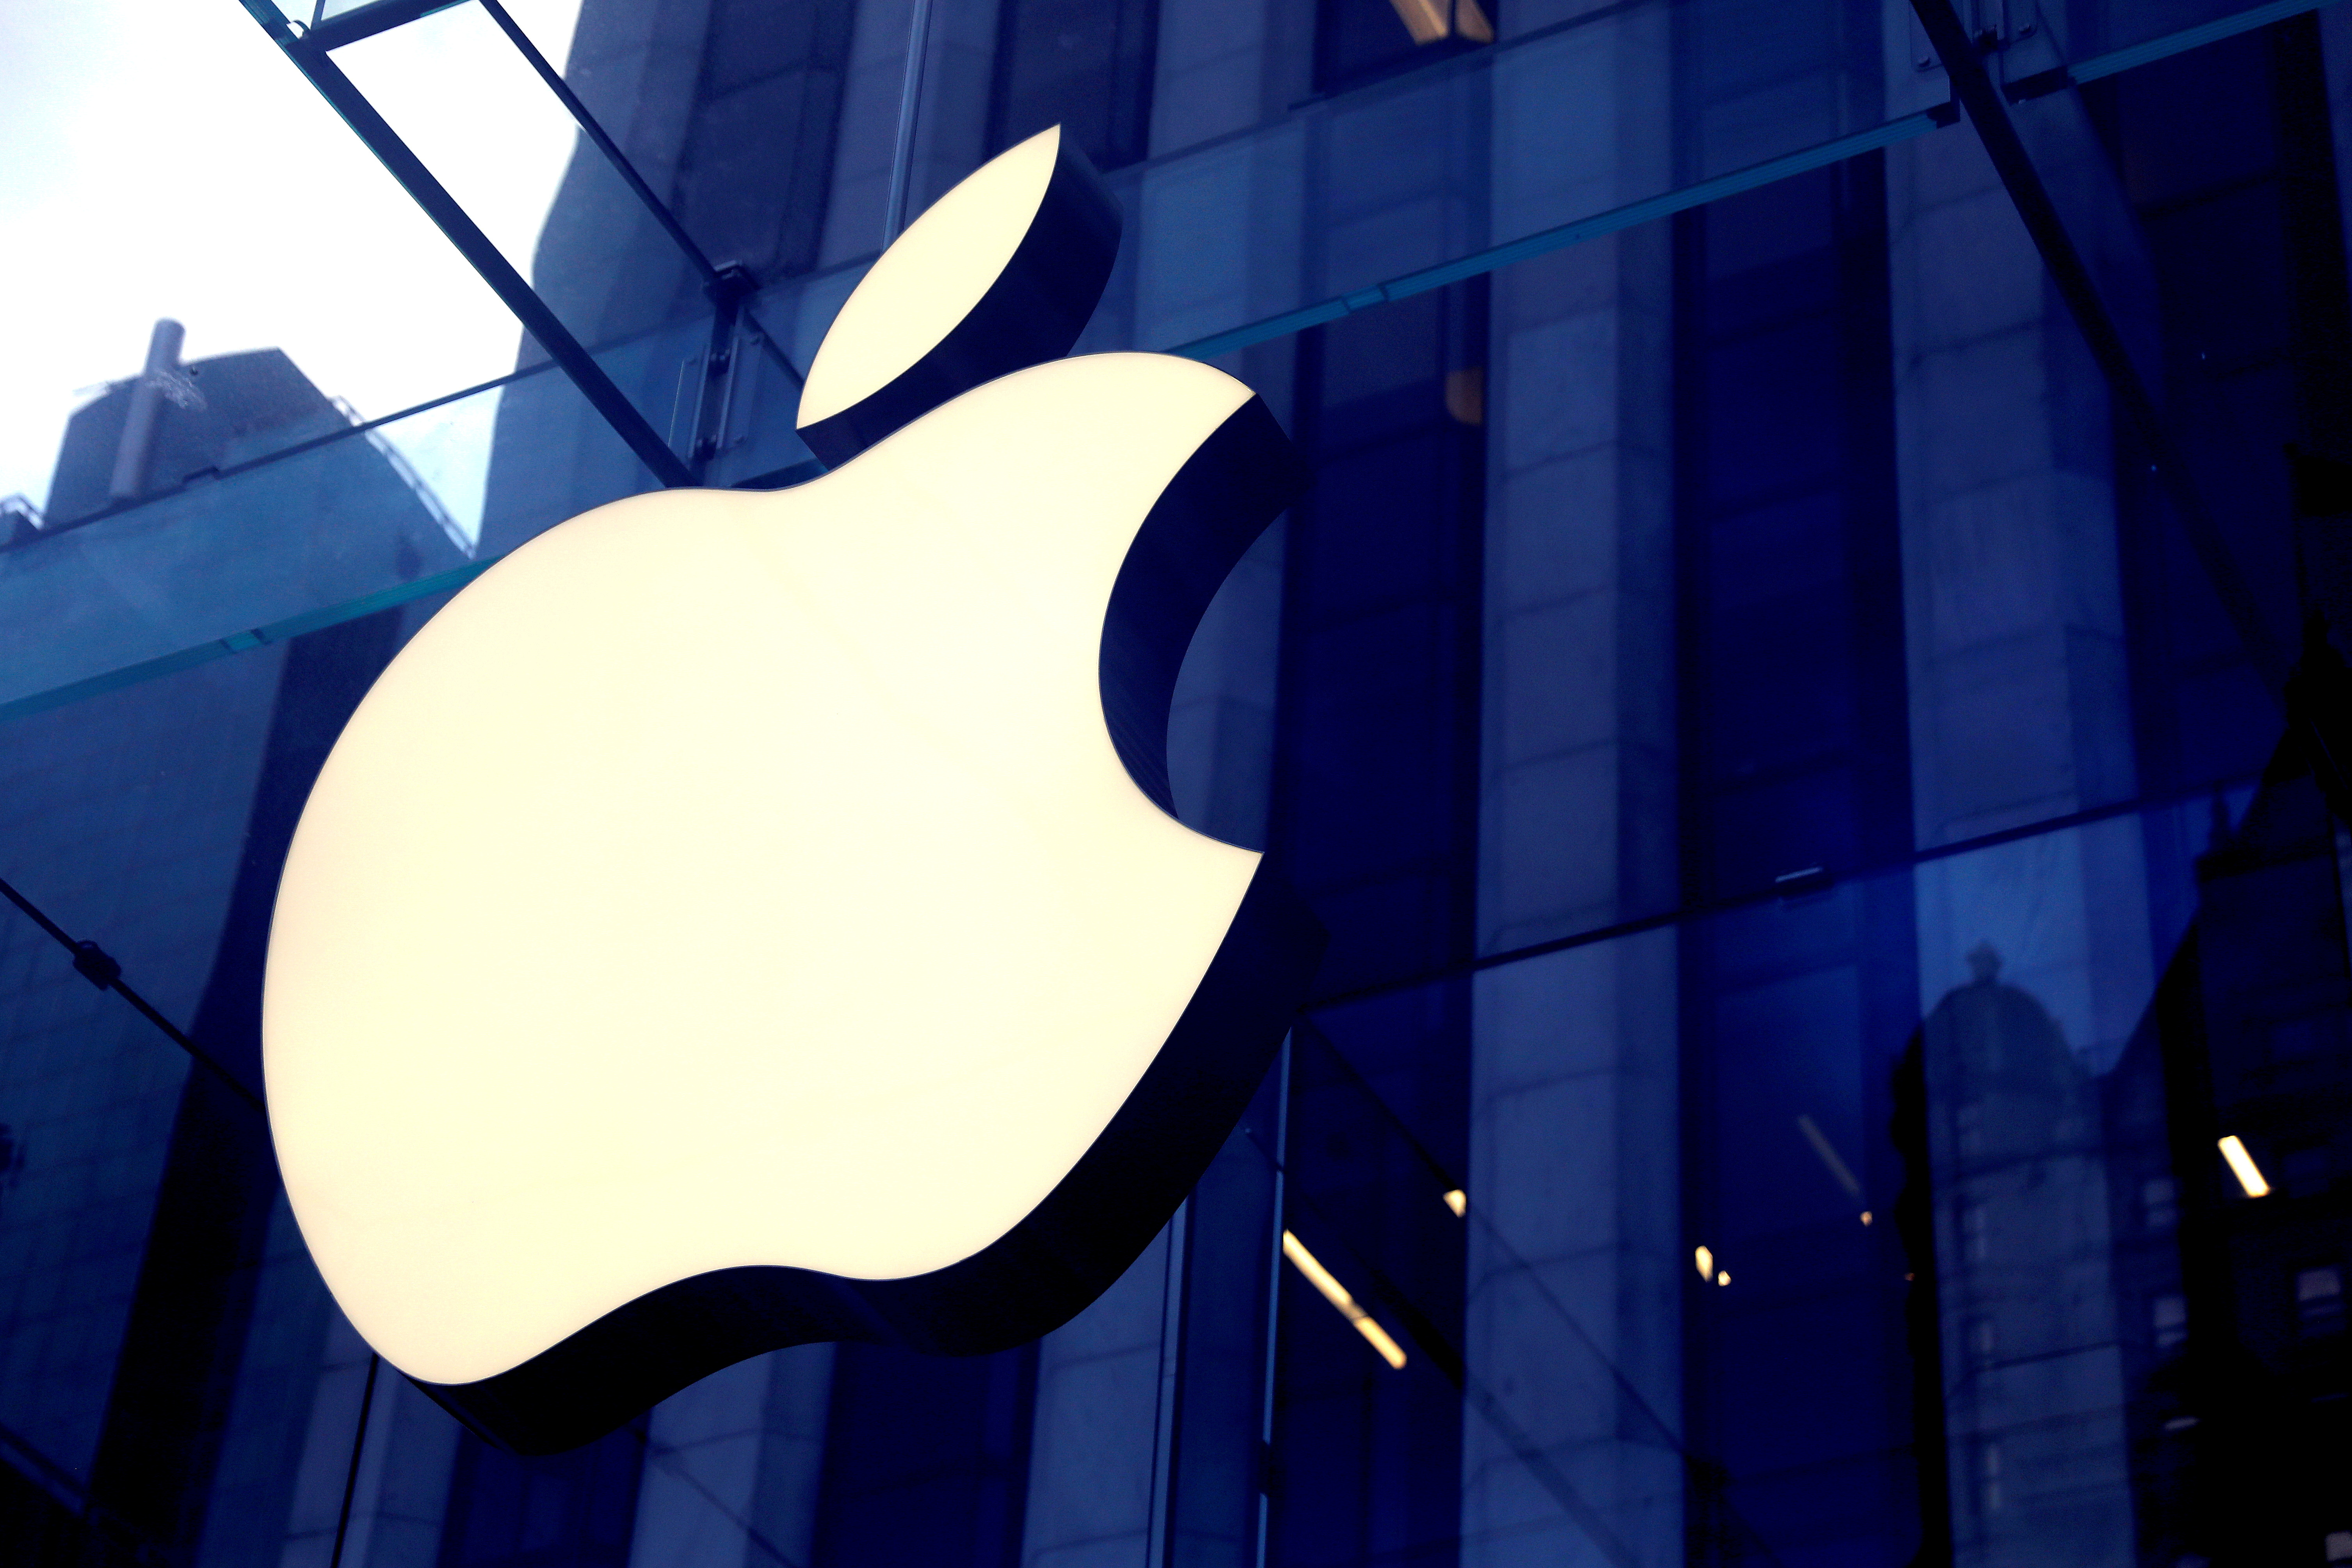 The Apple Inc logo is seen hanging at the entrance to the Apple store on 5th Avenue in New York